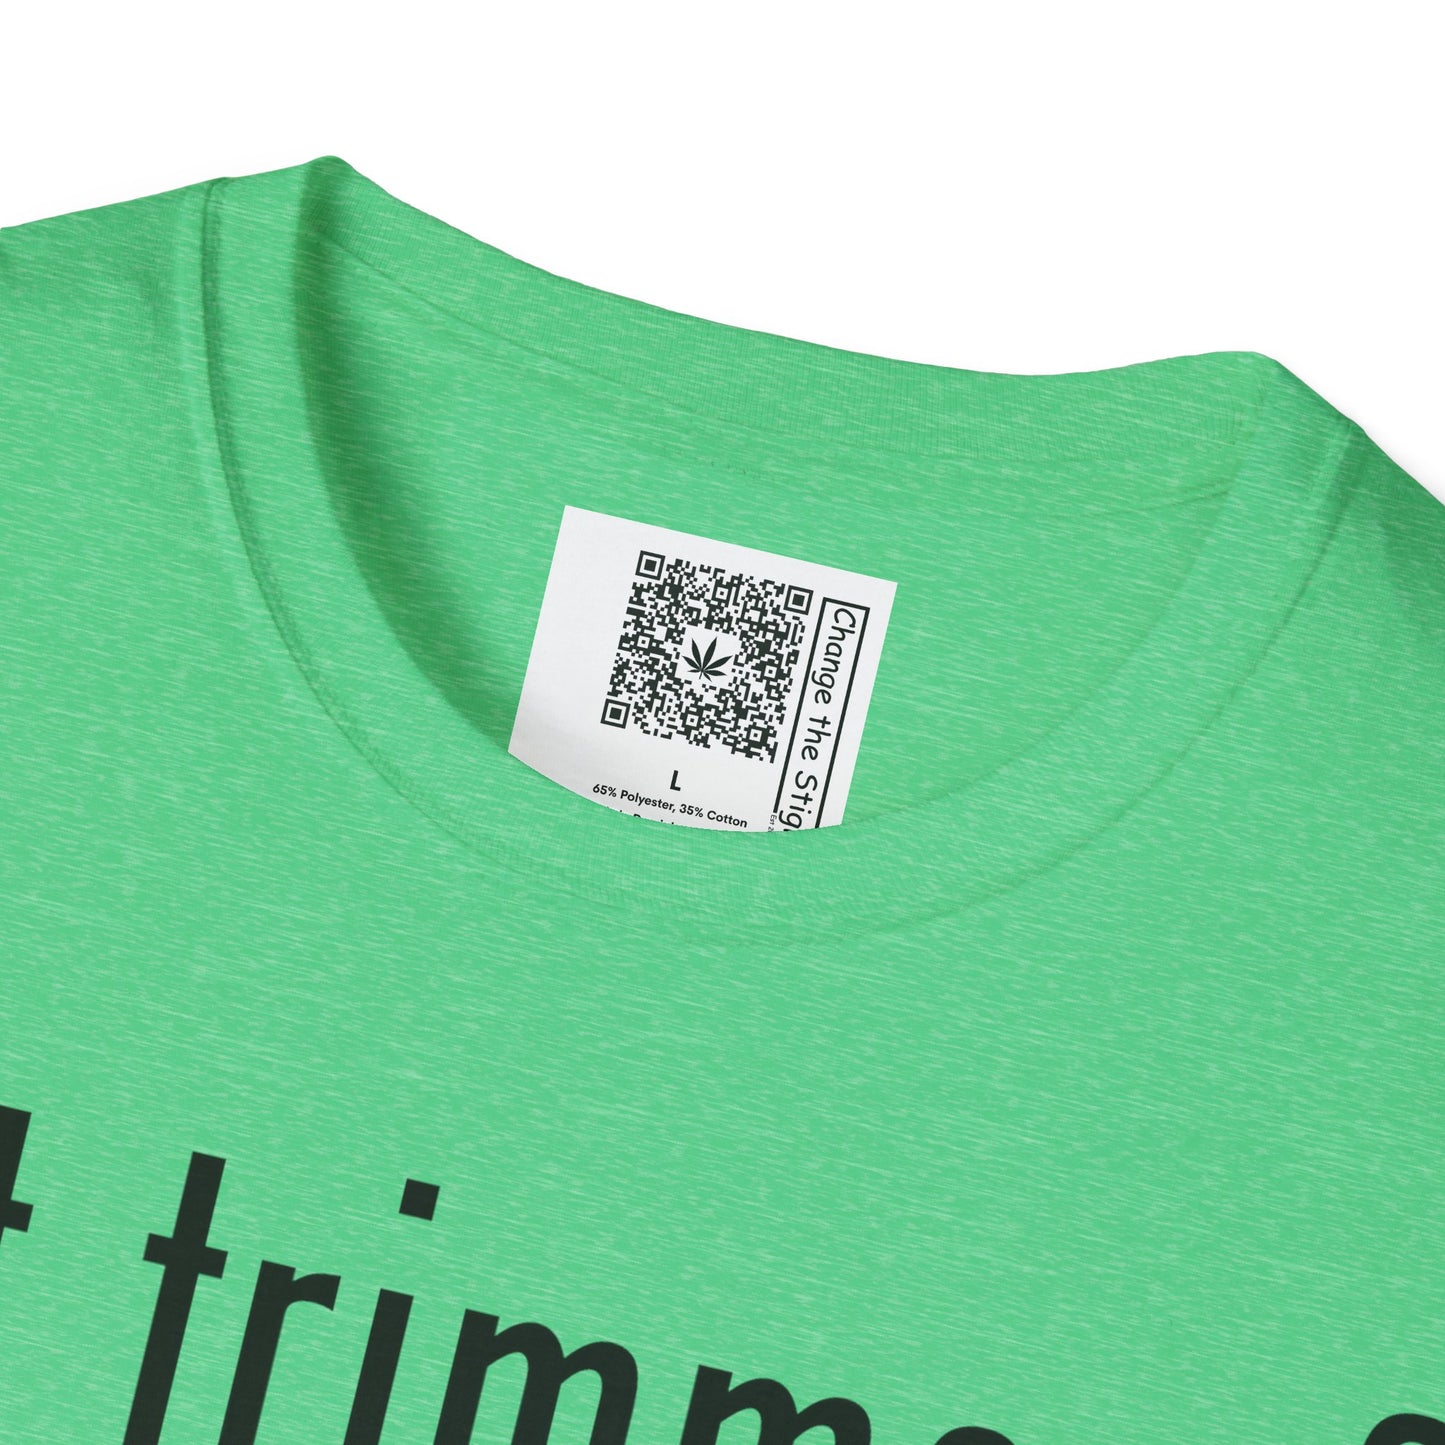 Change the Stigma GOT TRIMMERS Weed Shirt